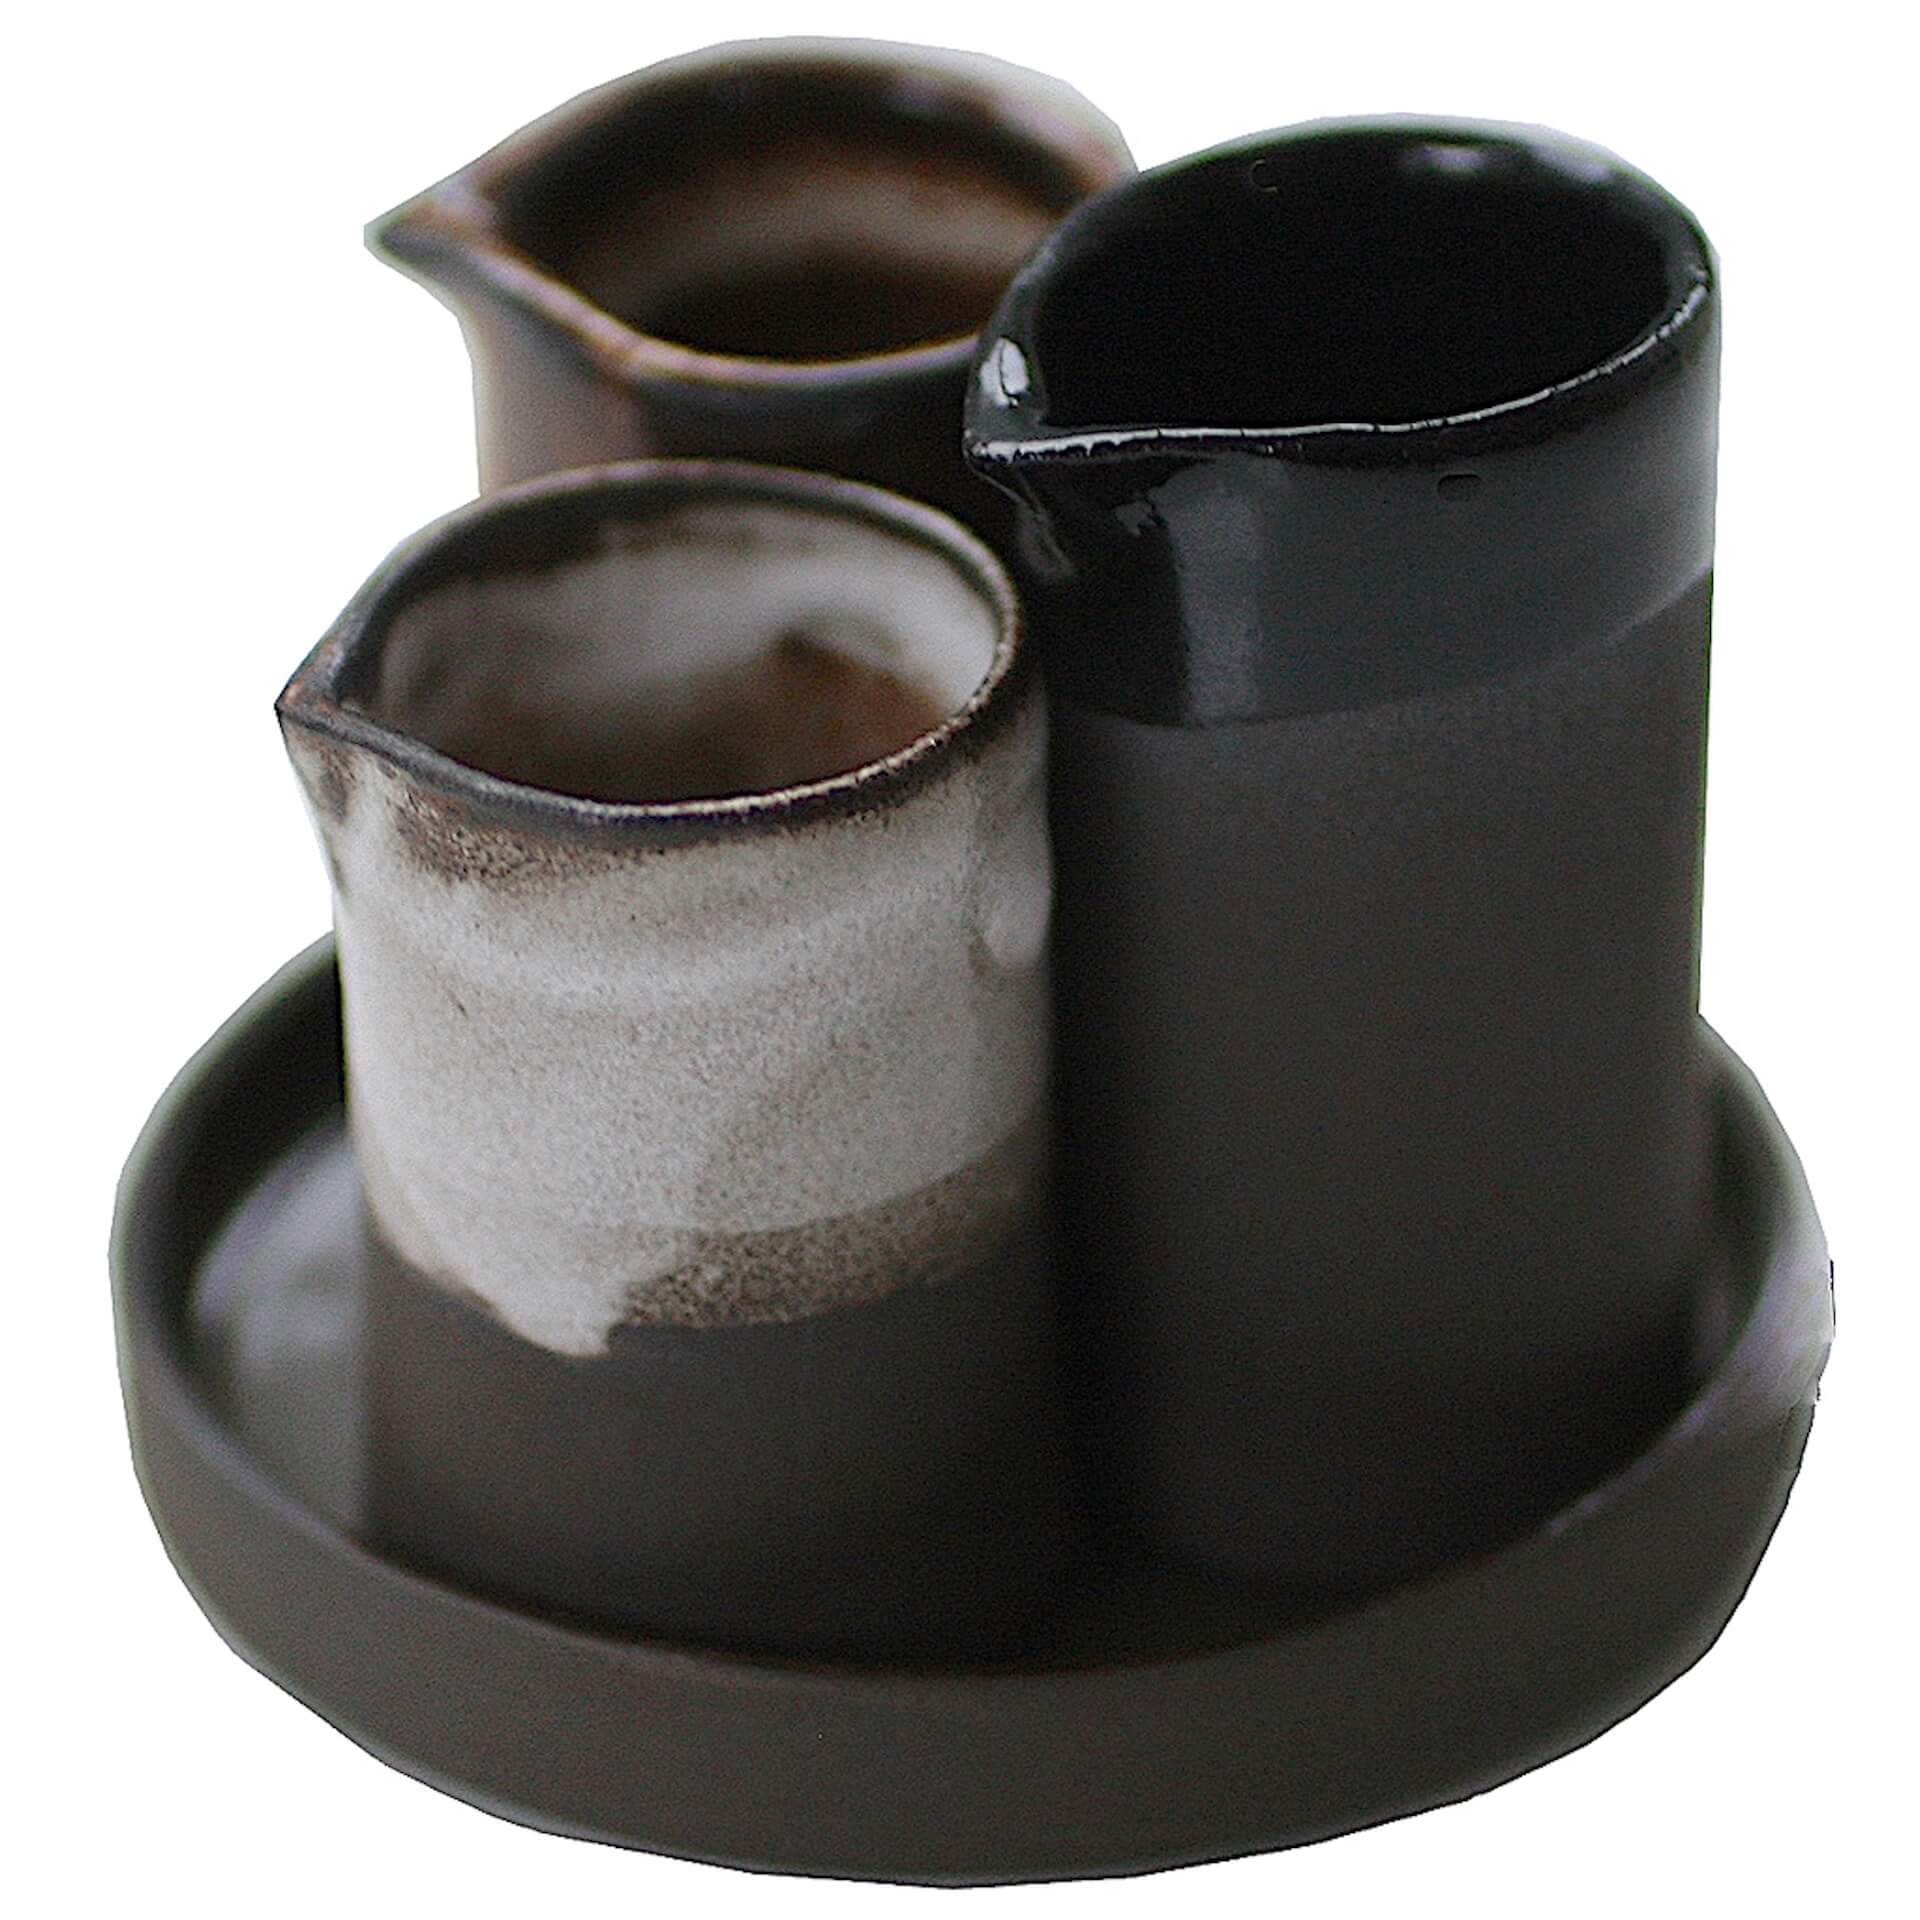 Naked Clay Ceramics Set of 3 Mini Wildflower Vases - Black Clay (various colours)